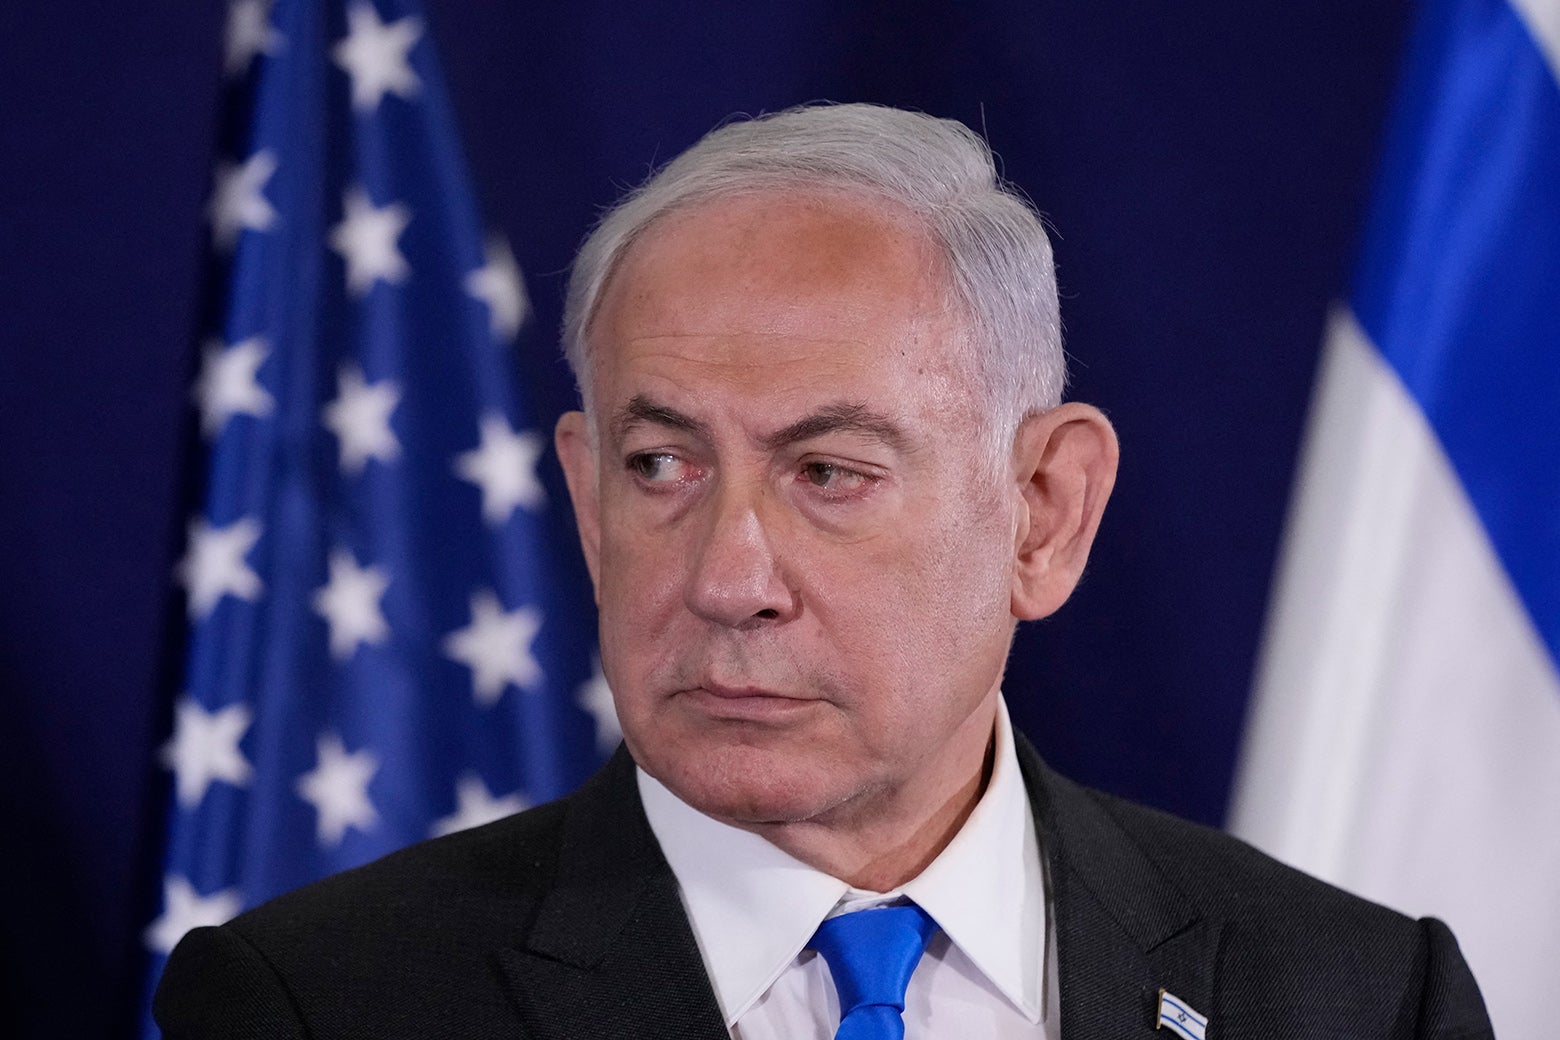 Netanyahu looks off to the side nervously.